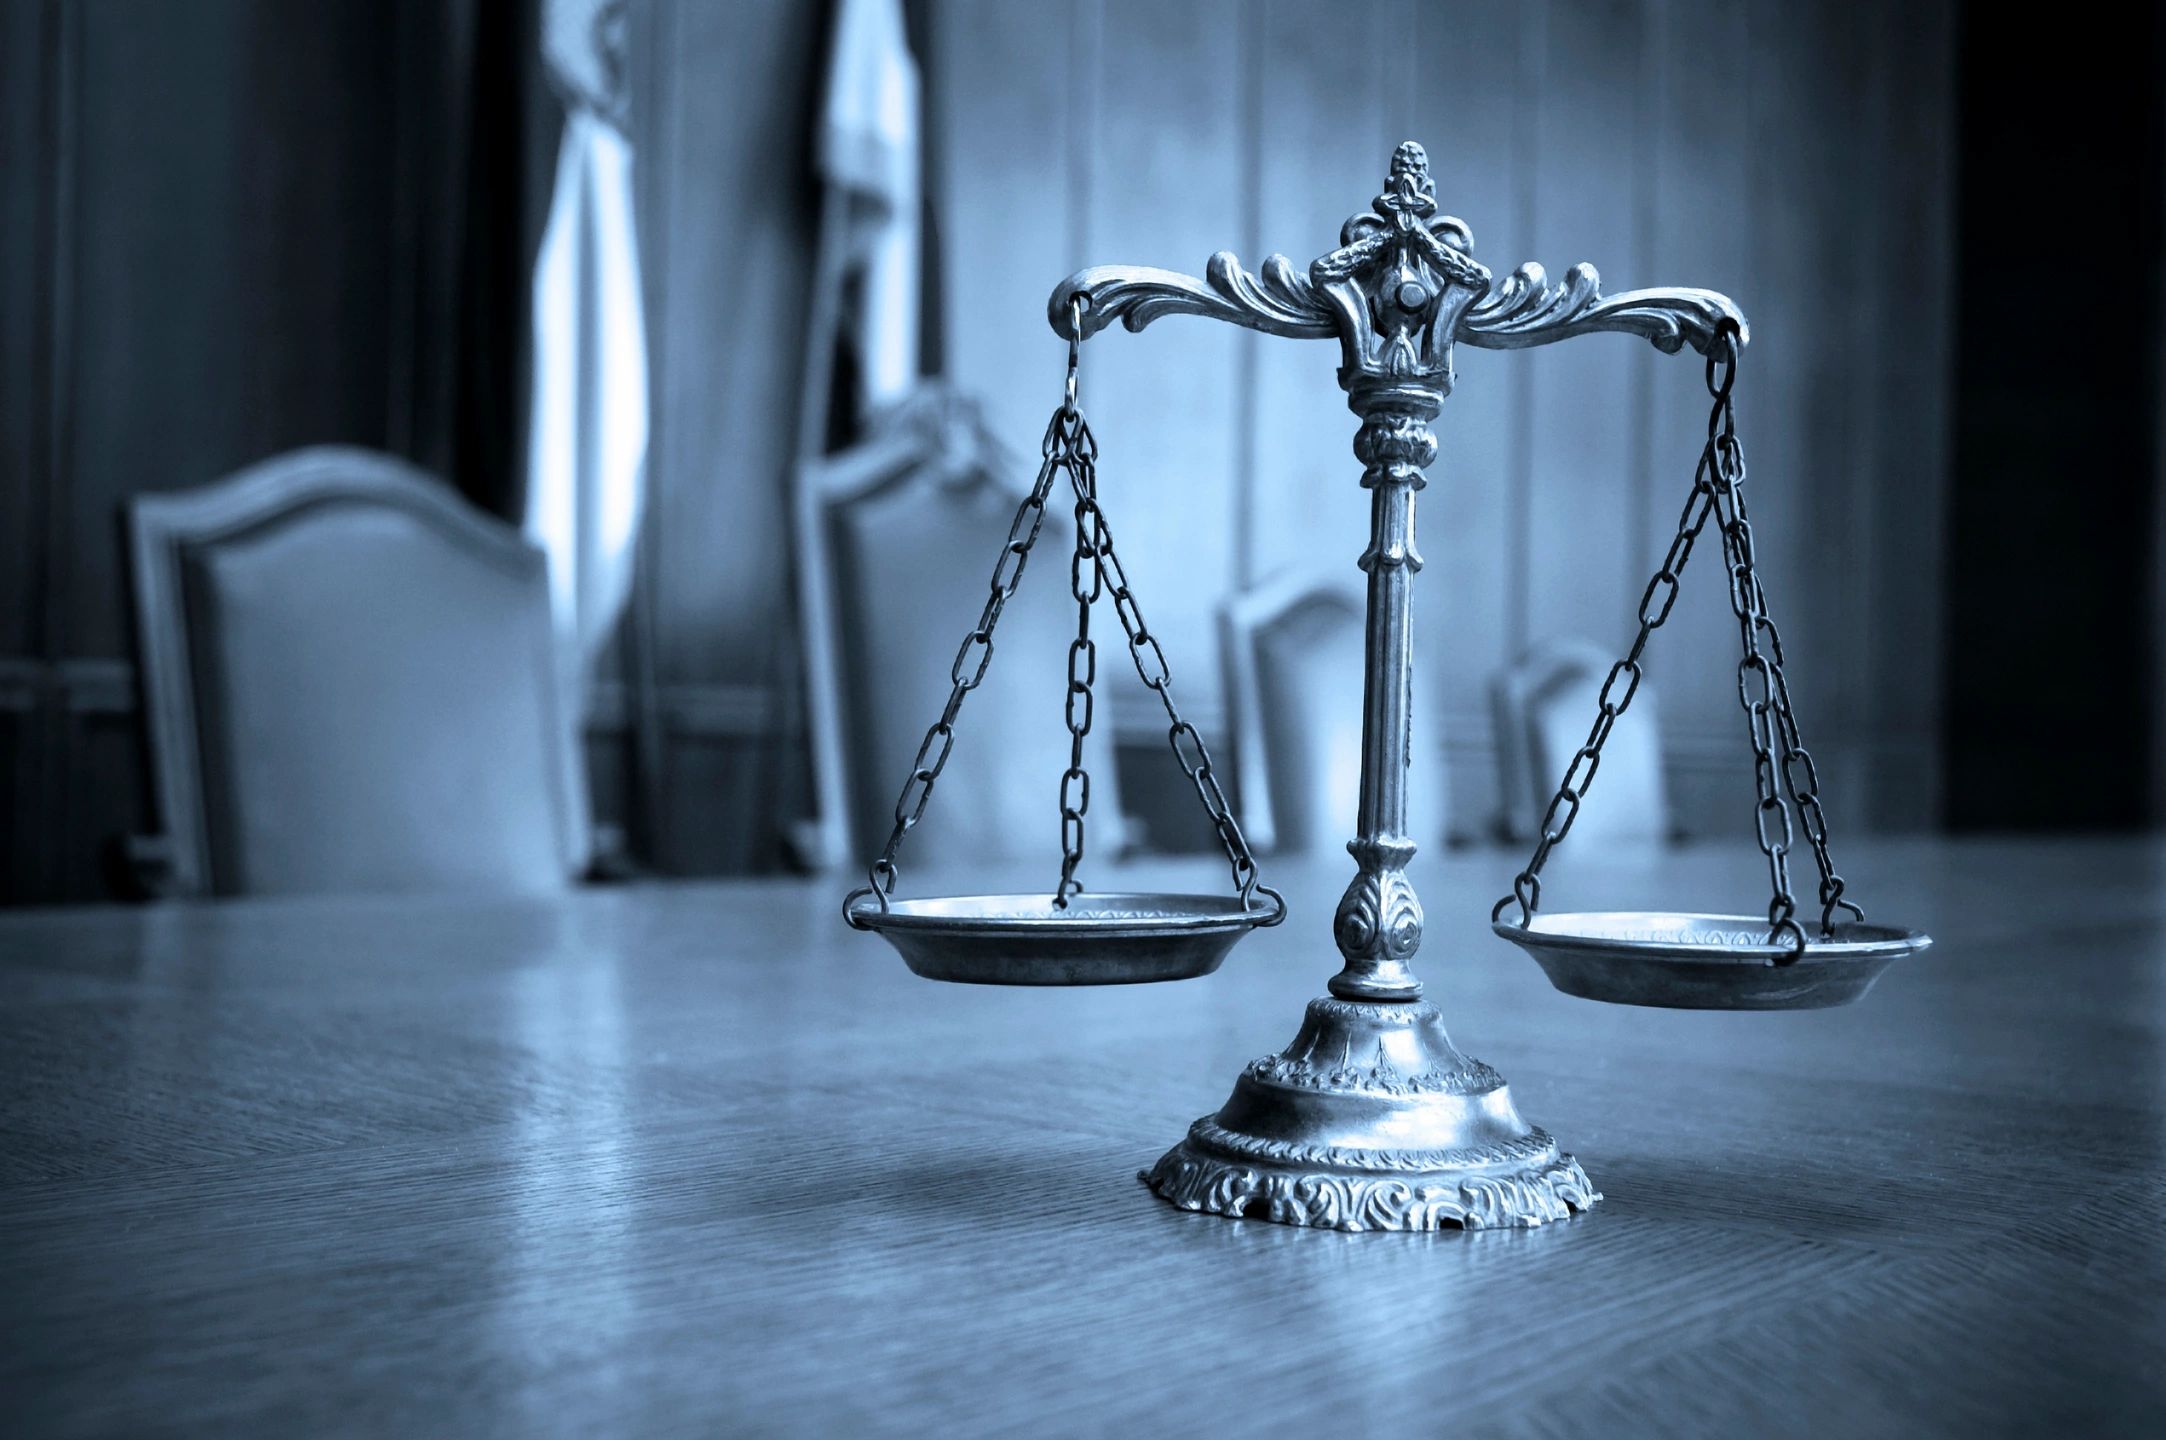 Legal scales are shown, in balance.